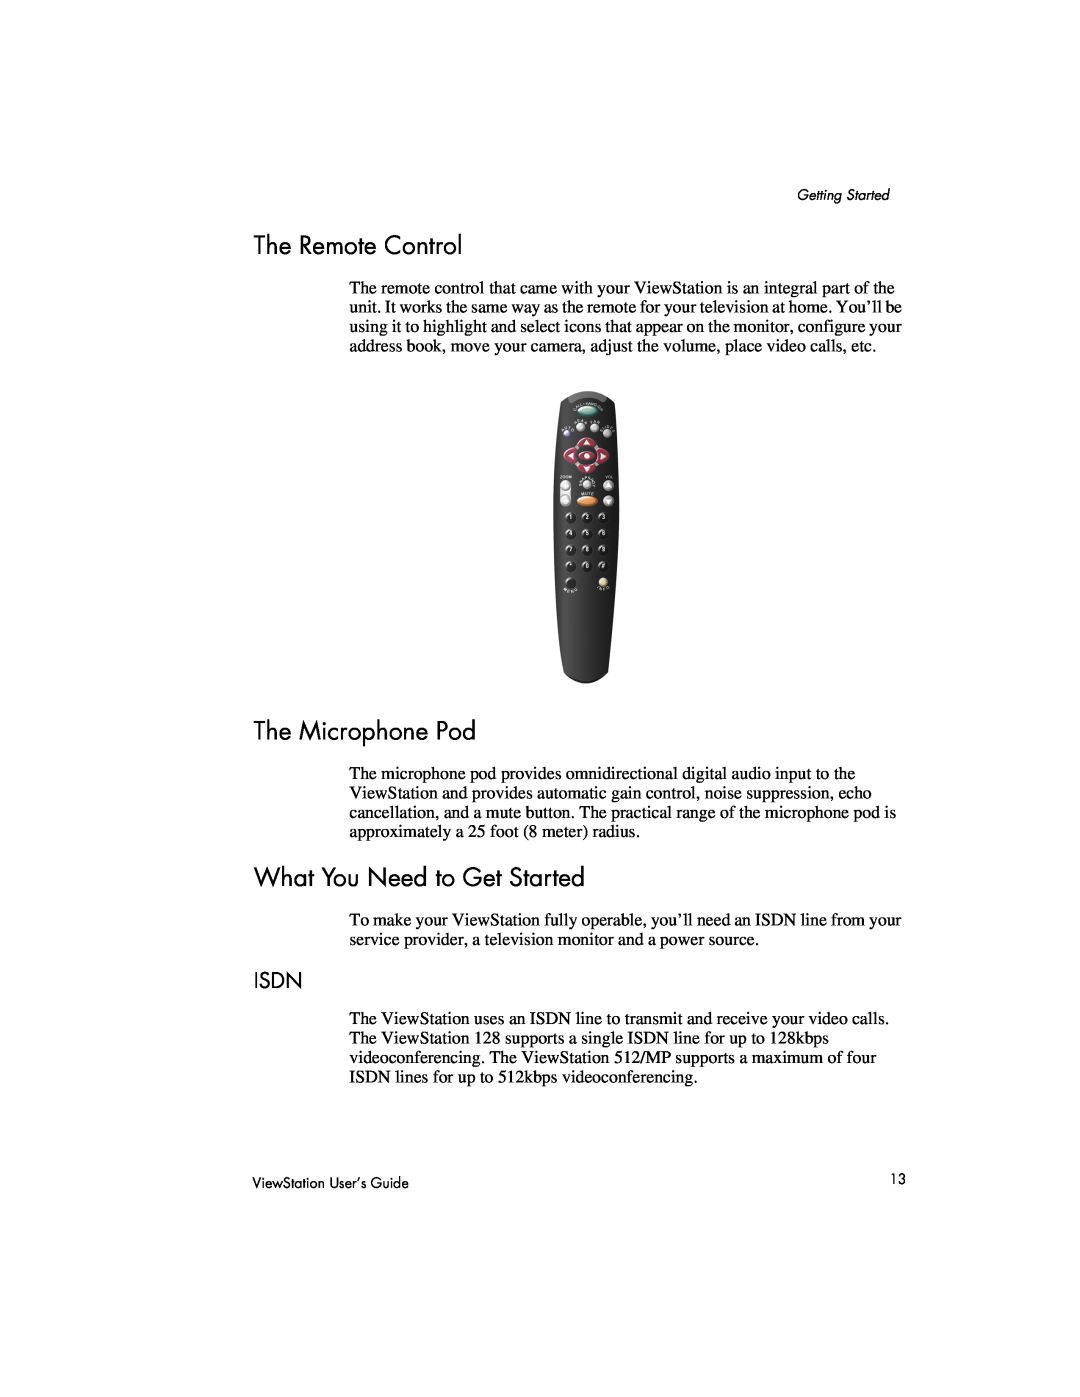 Polycom 512, 128, MP manual The Remote Control, The Microphone Pod, What You Need to Get Started, Isdn 